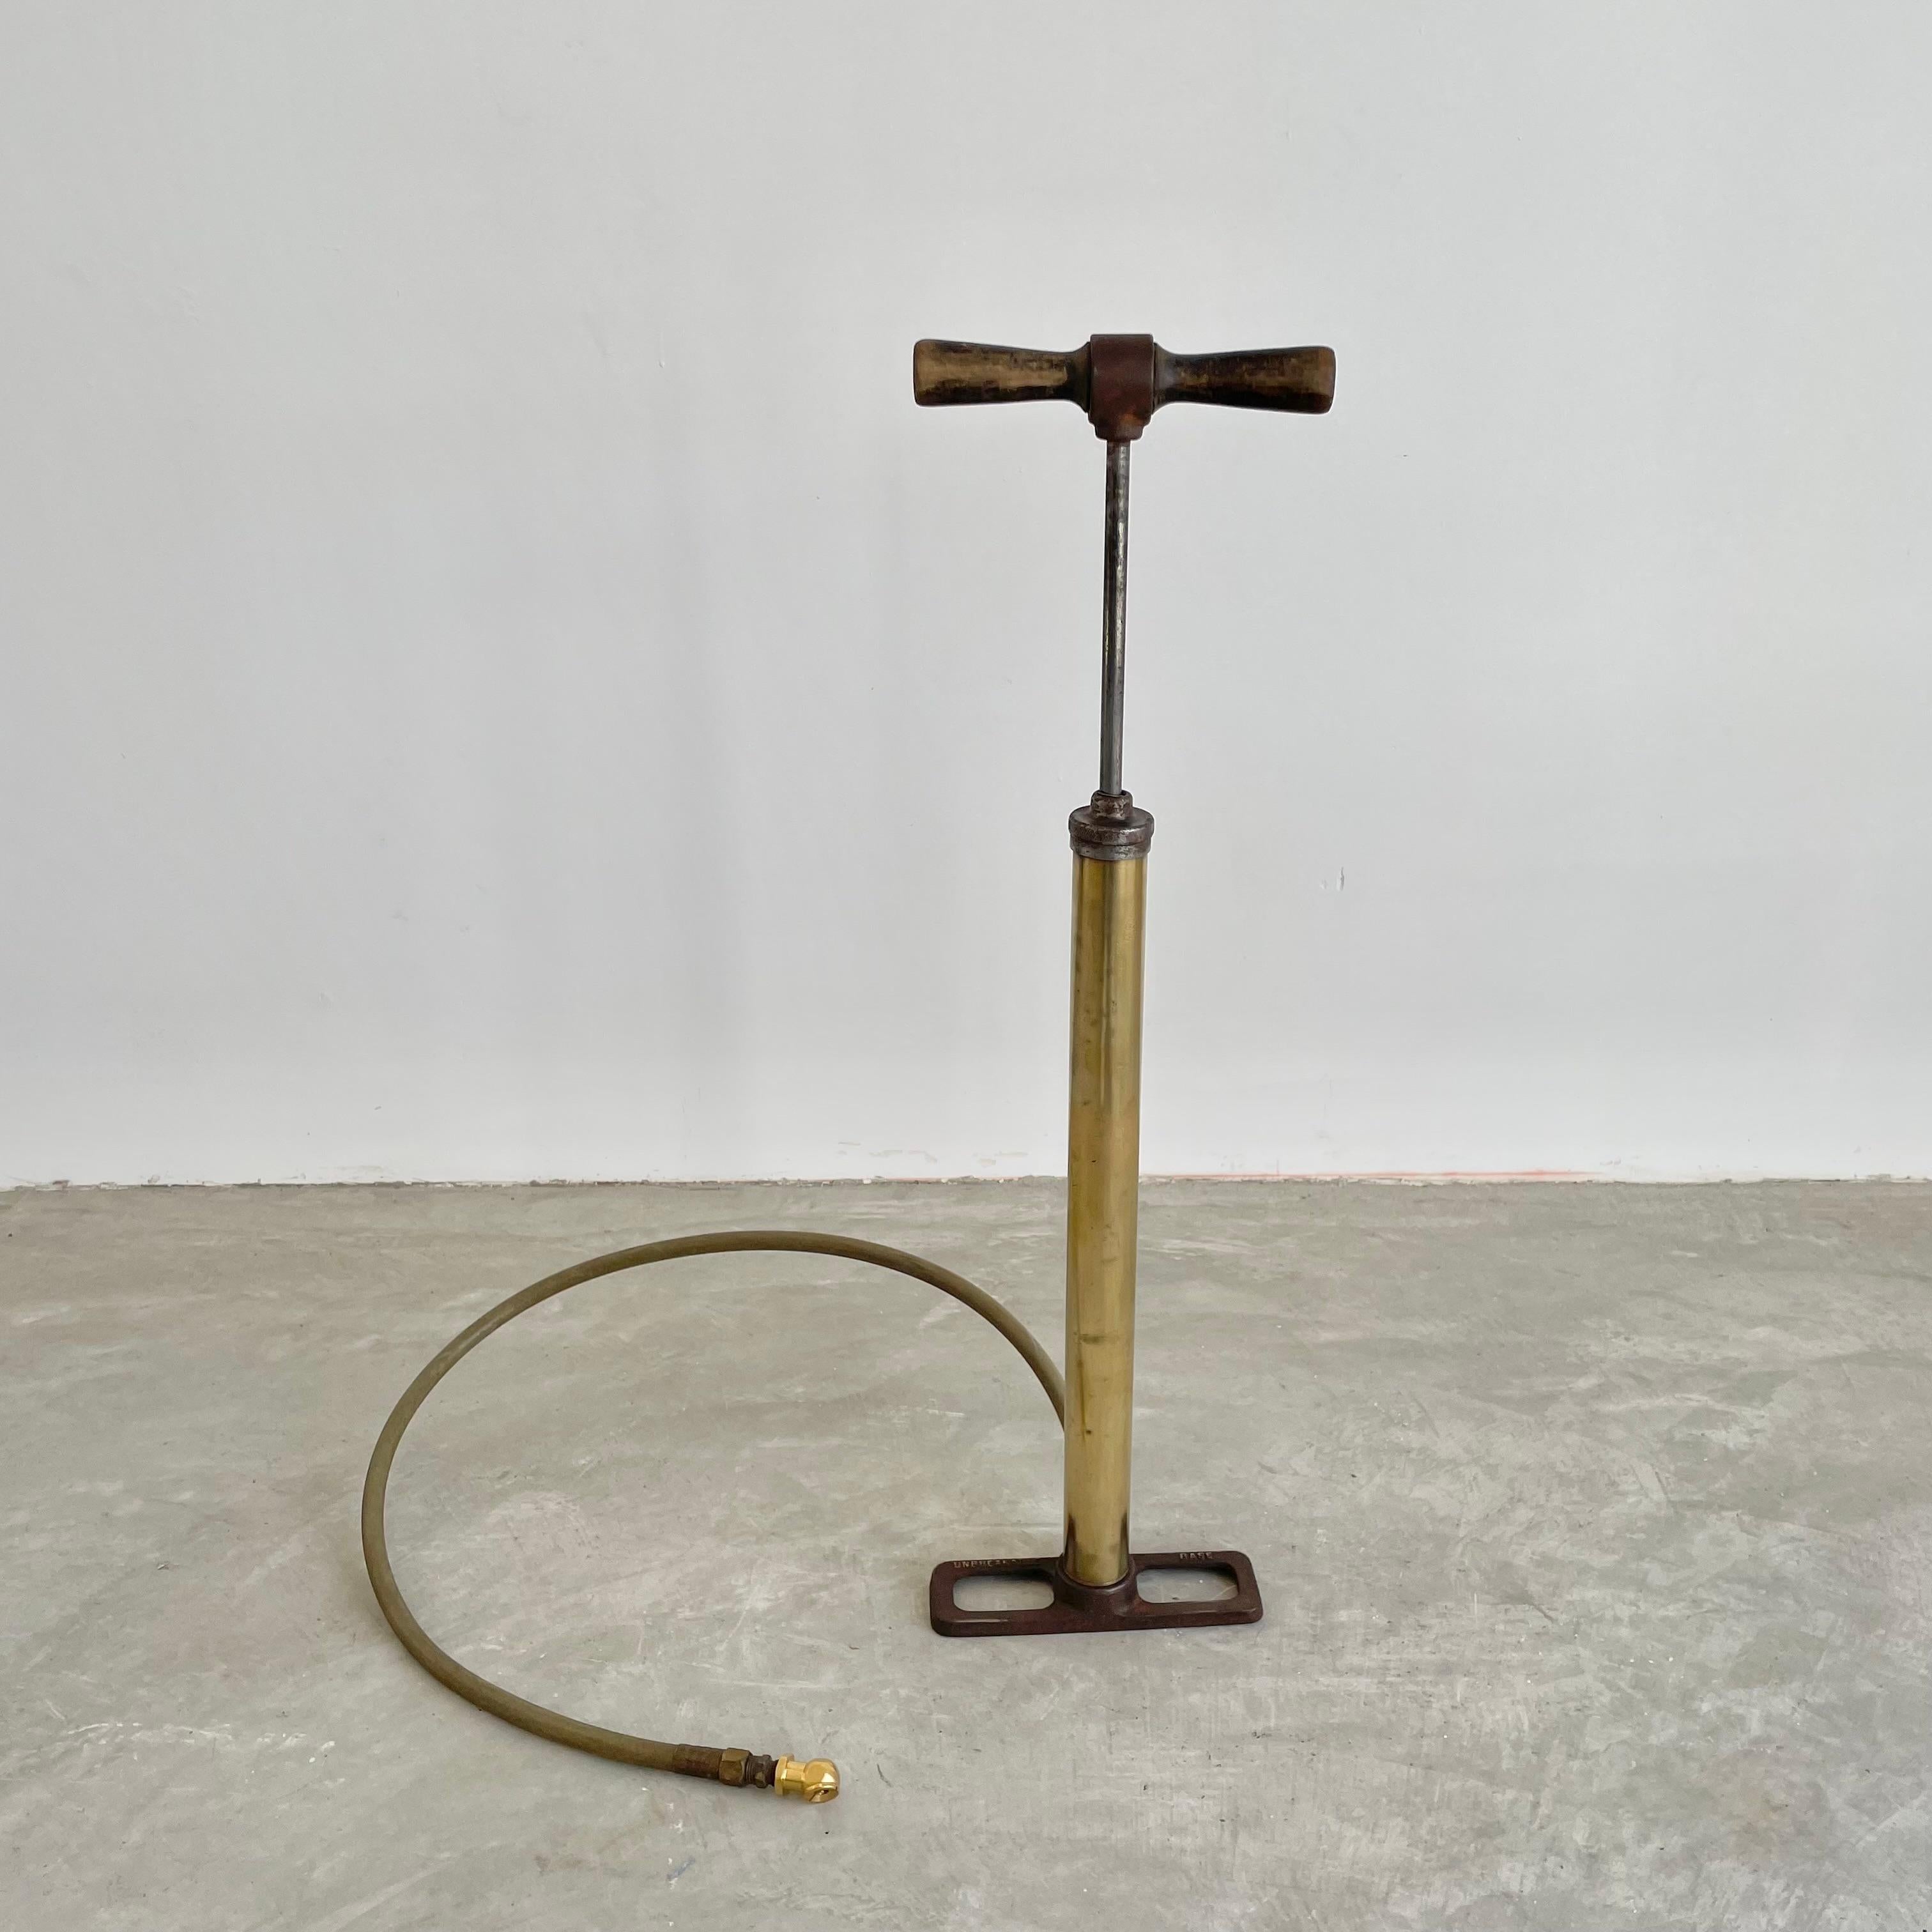 Cool 1930s antiqued brass and wood bike pump with rubber hose. Metal base with 'Unbreakable Base' embossed on the surface. Amazing patina to body and wooden handles. Great for bicycle enthusiasts. Pump blows air but cannot confirm that it will